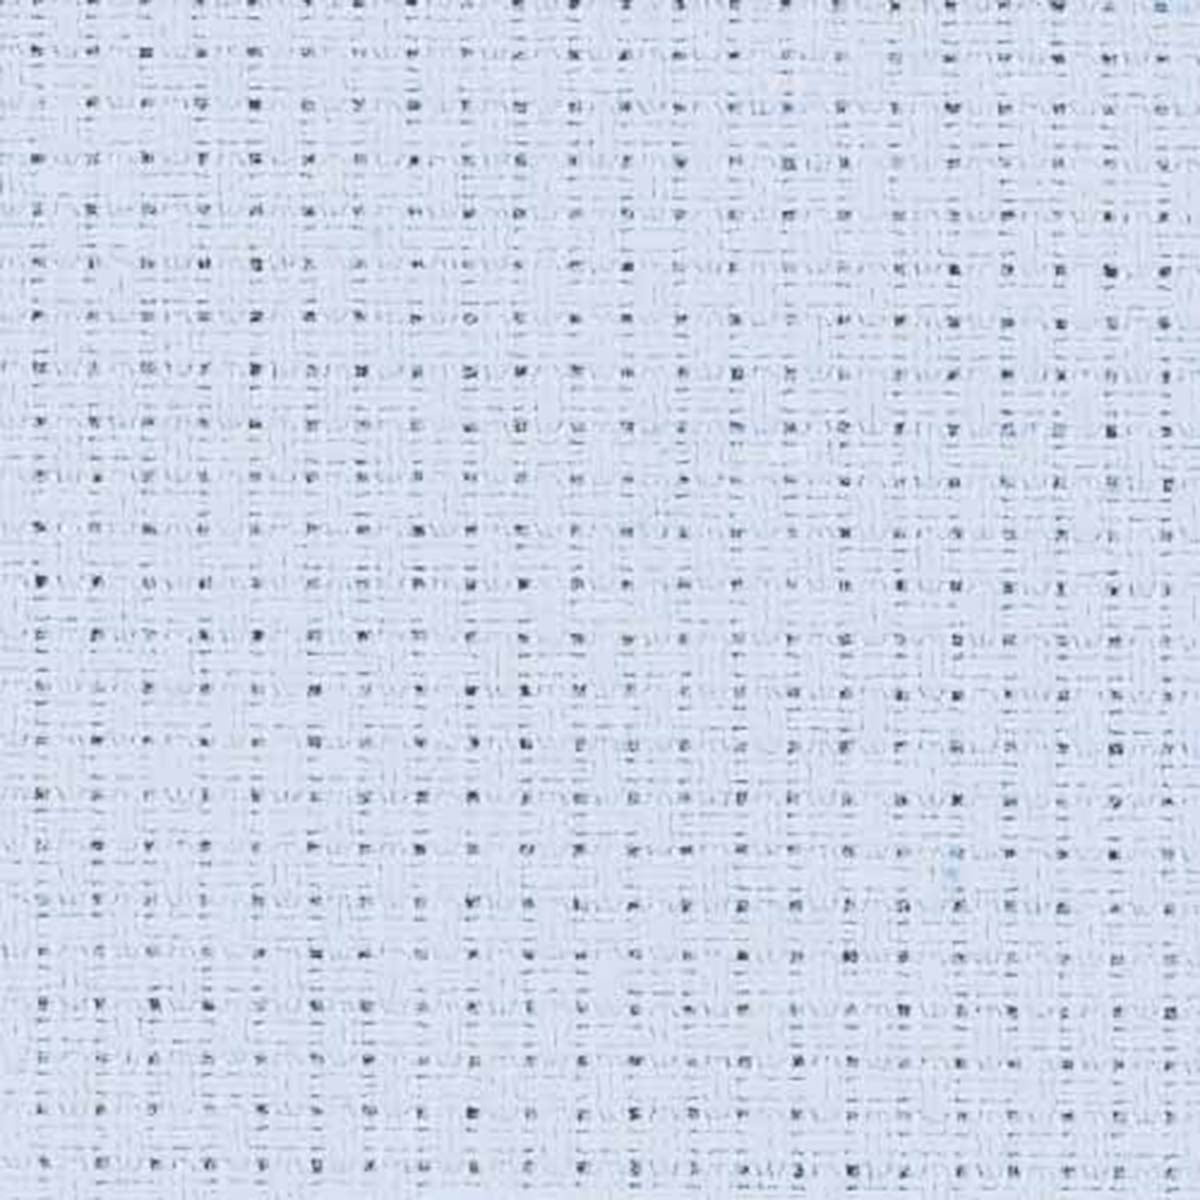 Wedgwood Blue 18 Count Zweigart Aida cross stitch fabric - various size  options